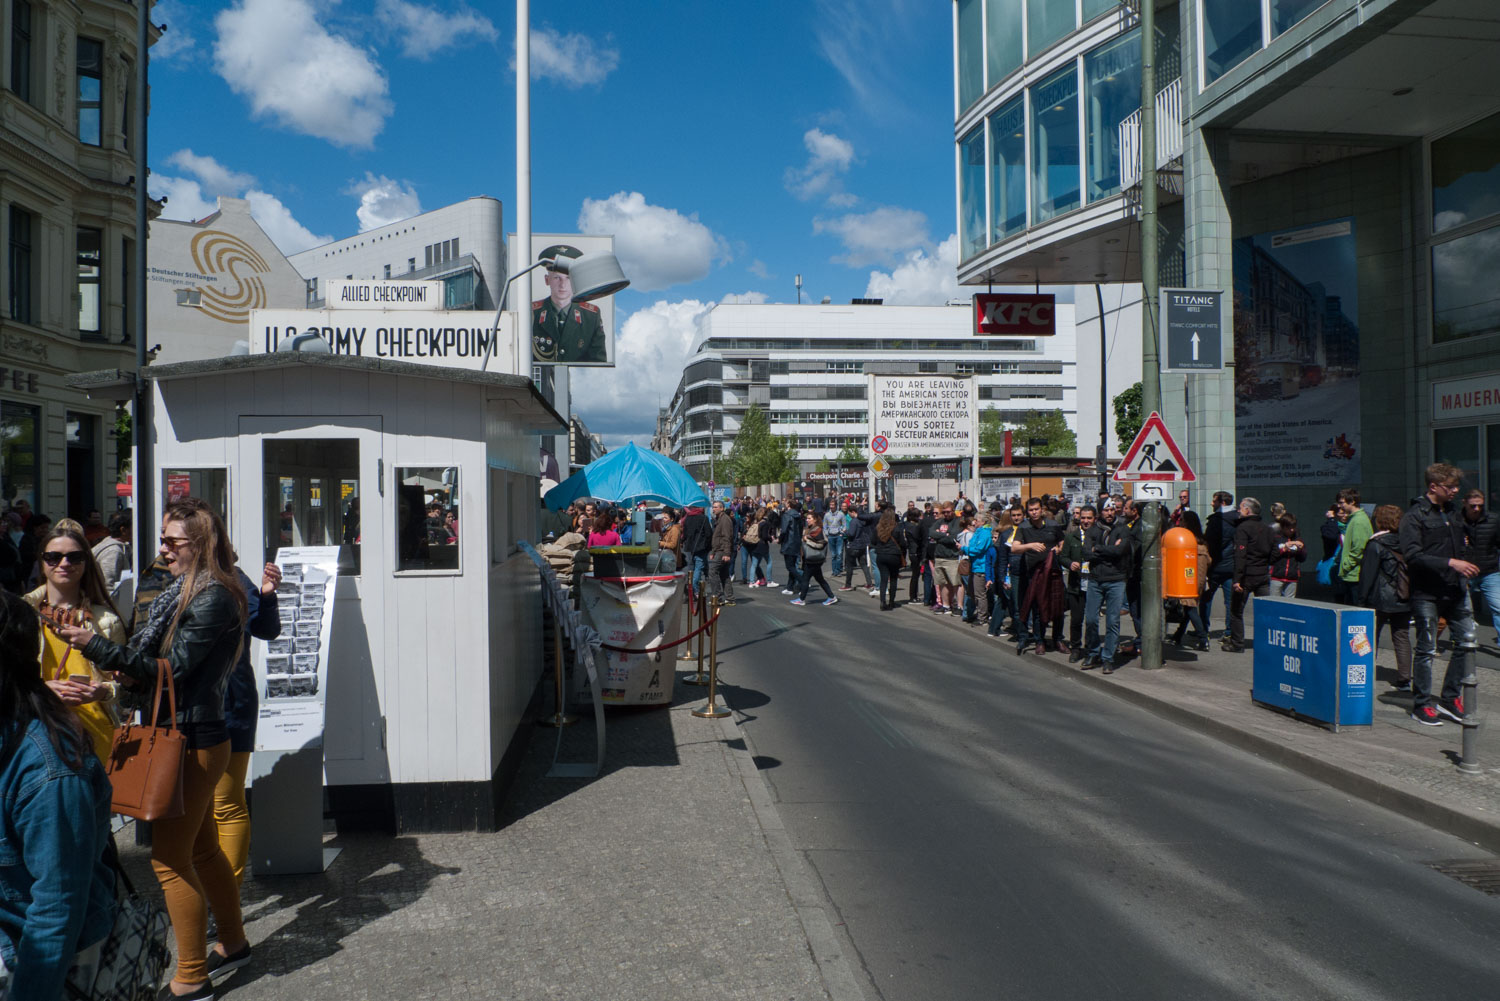 344. Checkpoint Charlie